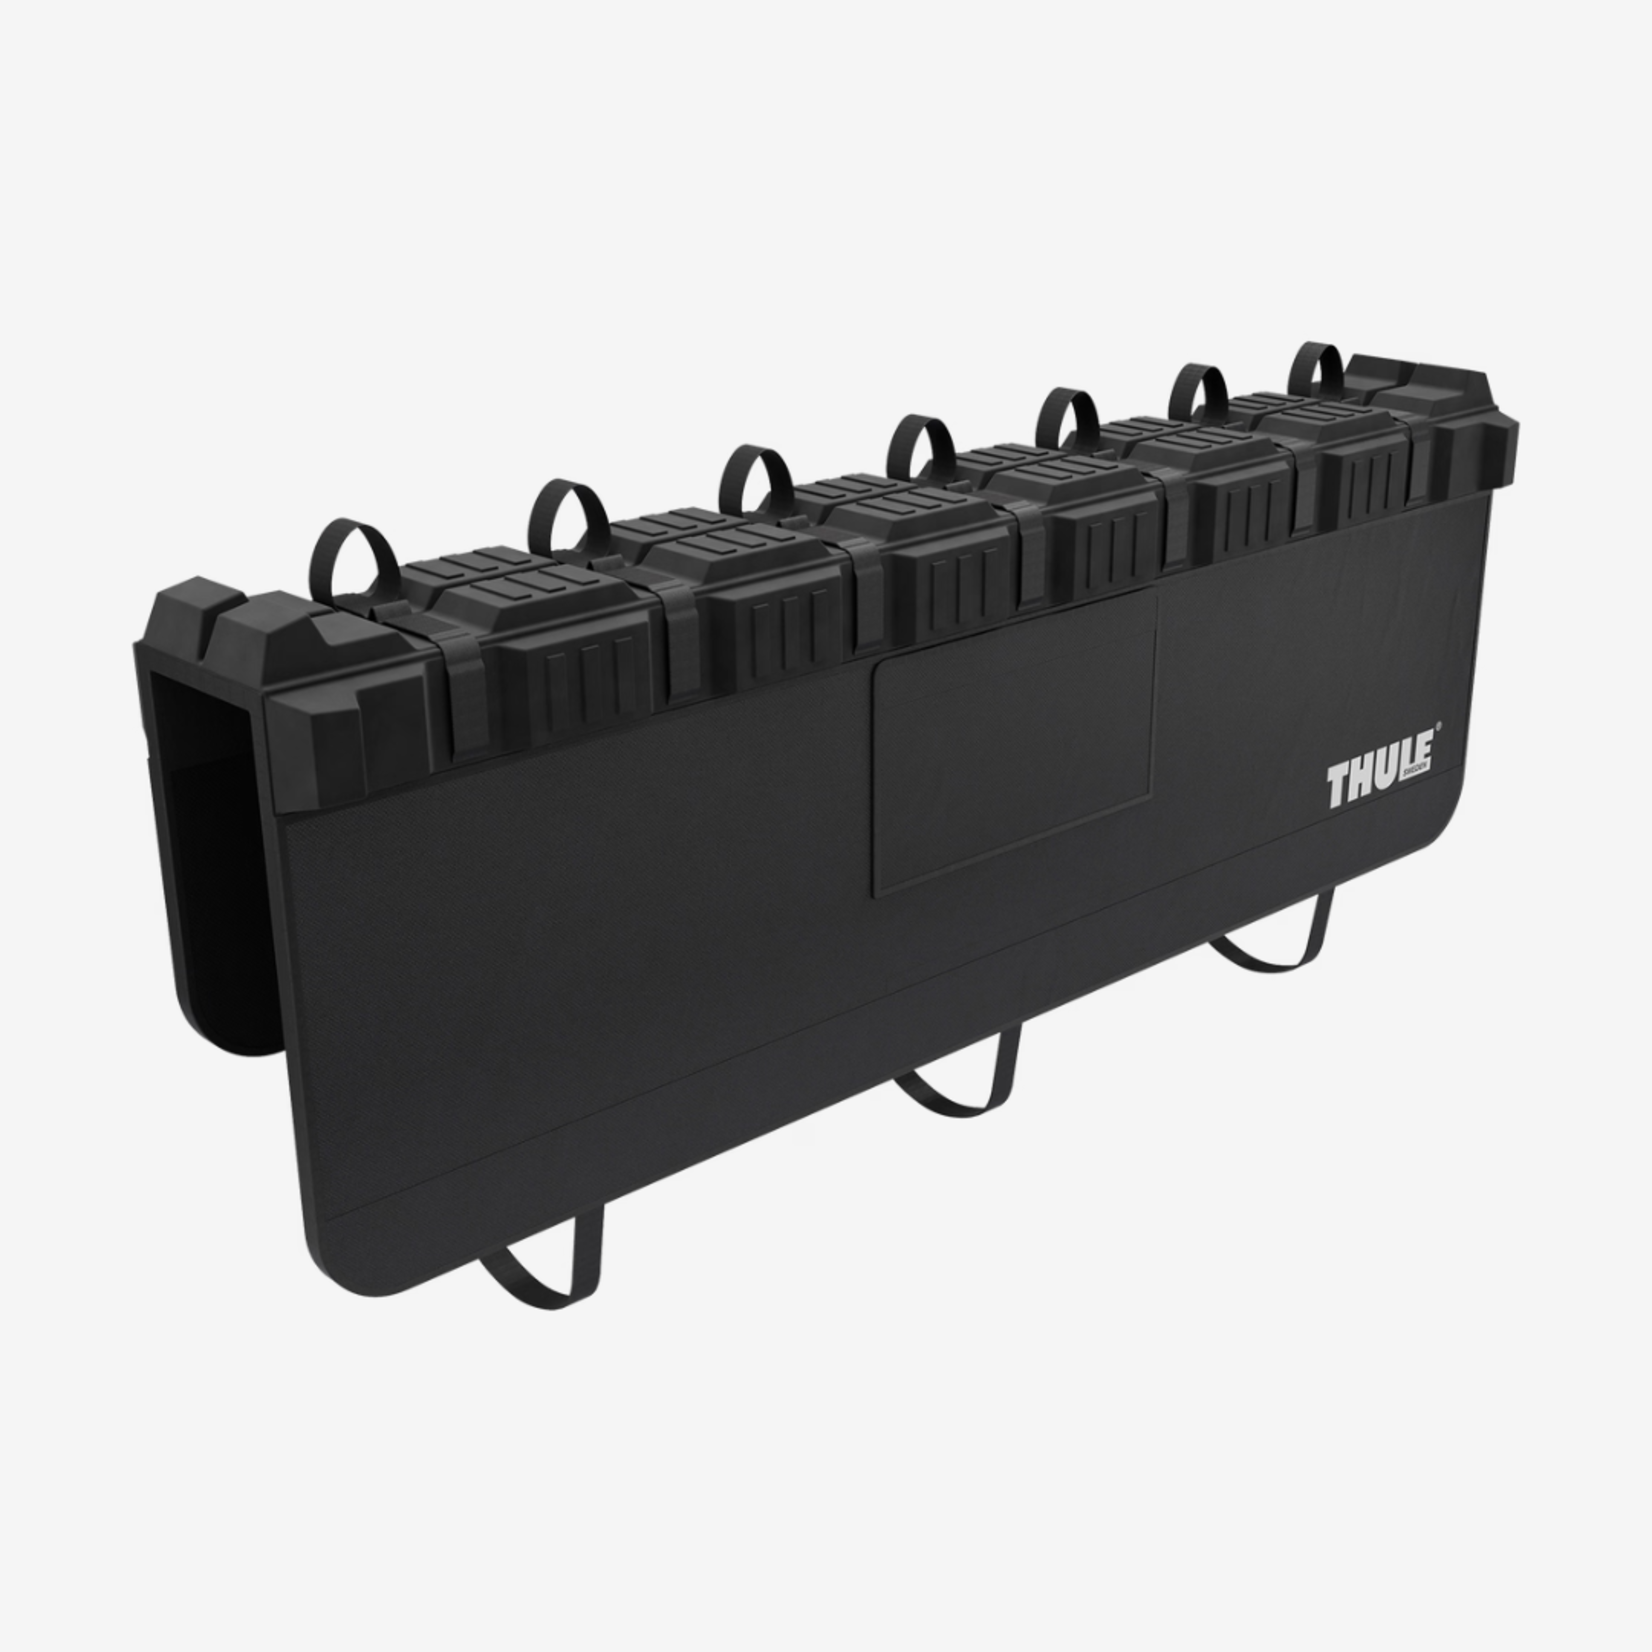 THULE GATEMATE PRO TRUCK BED PAD